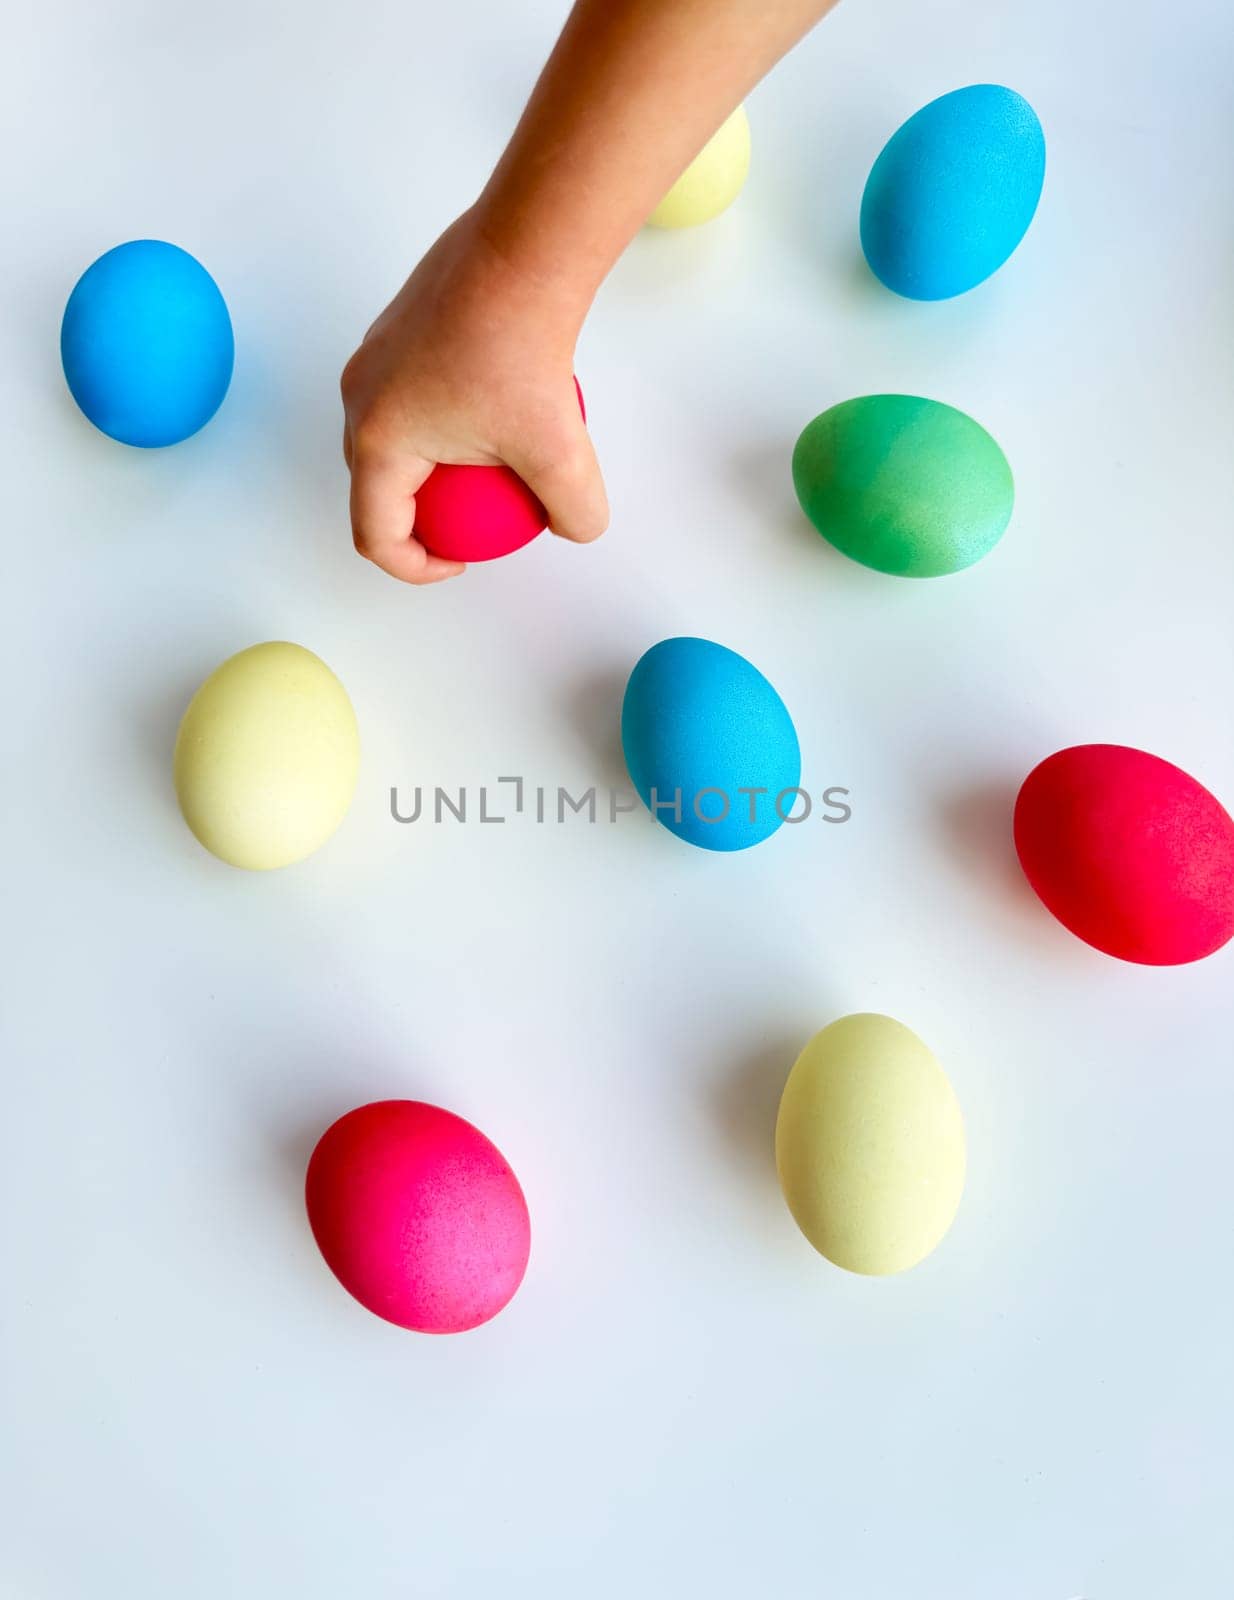 Child's hand picking up blue Easter egg among colorful eggs on white surface, interactive and engaging holiday activity concept. Can be used for educational content highlighting fine motor skills development in children, Easter egg hunt event promotions. High quality photo